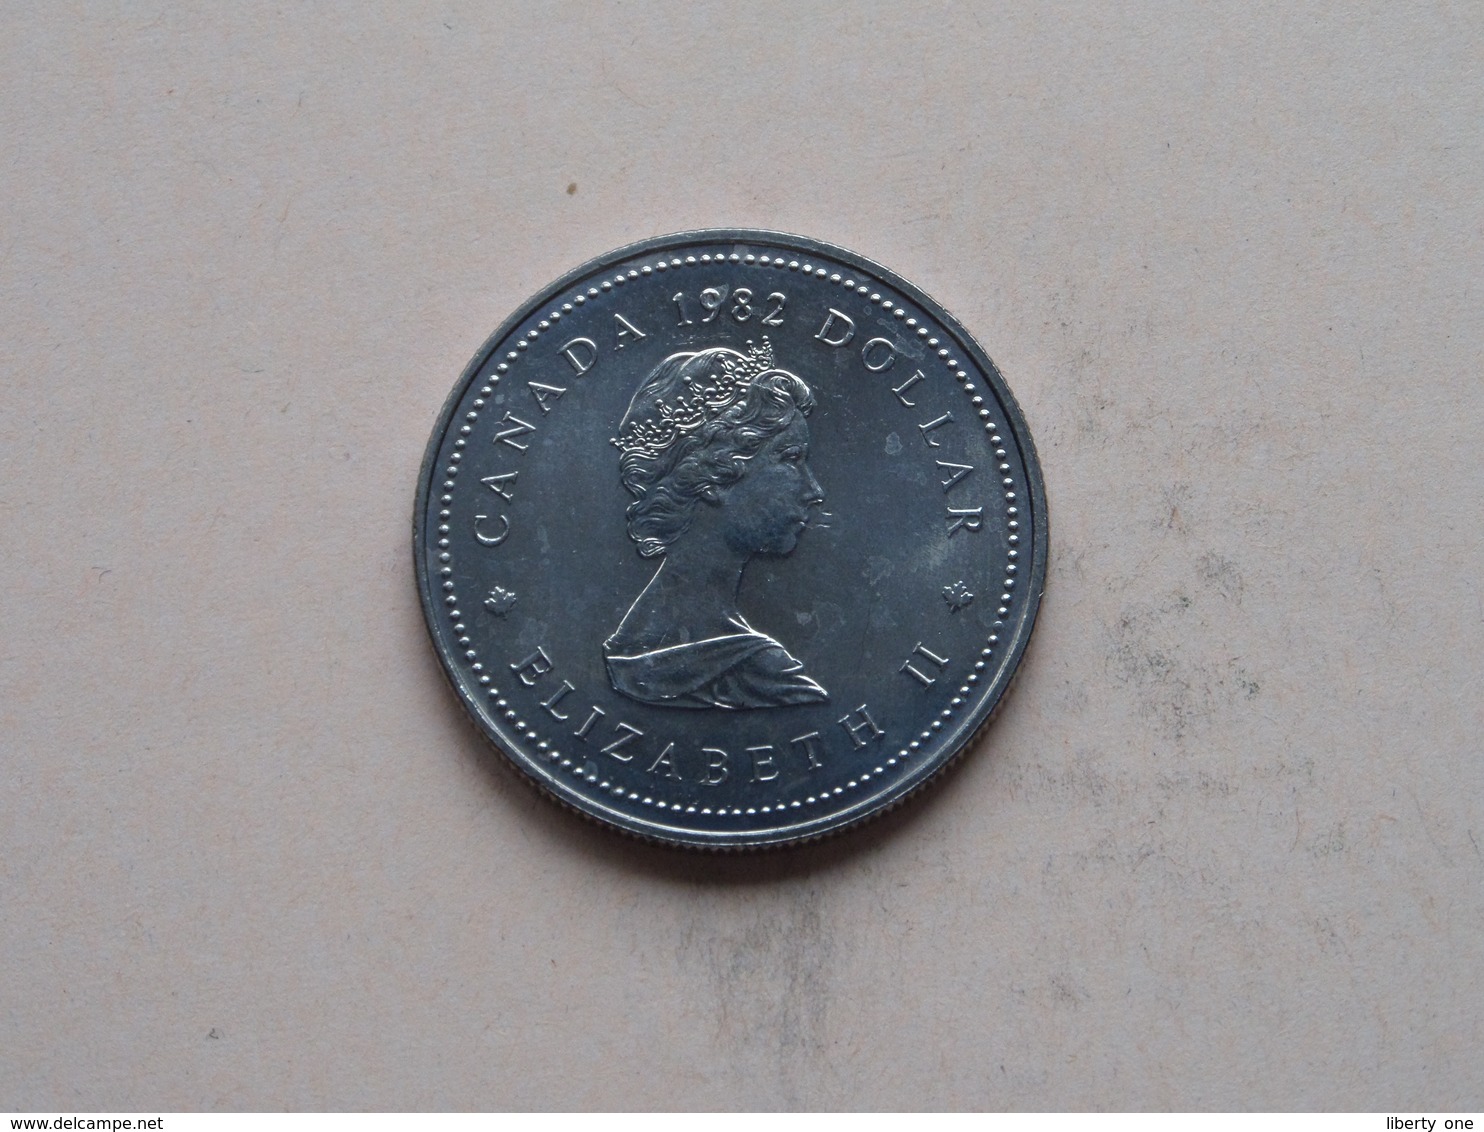 1982 - DOLLAR / 1867 CONFEDERATION - CONSTITITION 1982 ( KM 134 ) Uncleaned ! - Canada